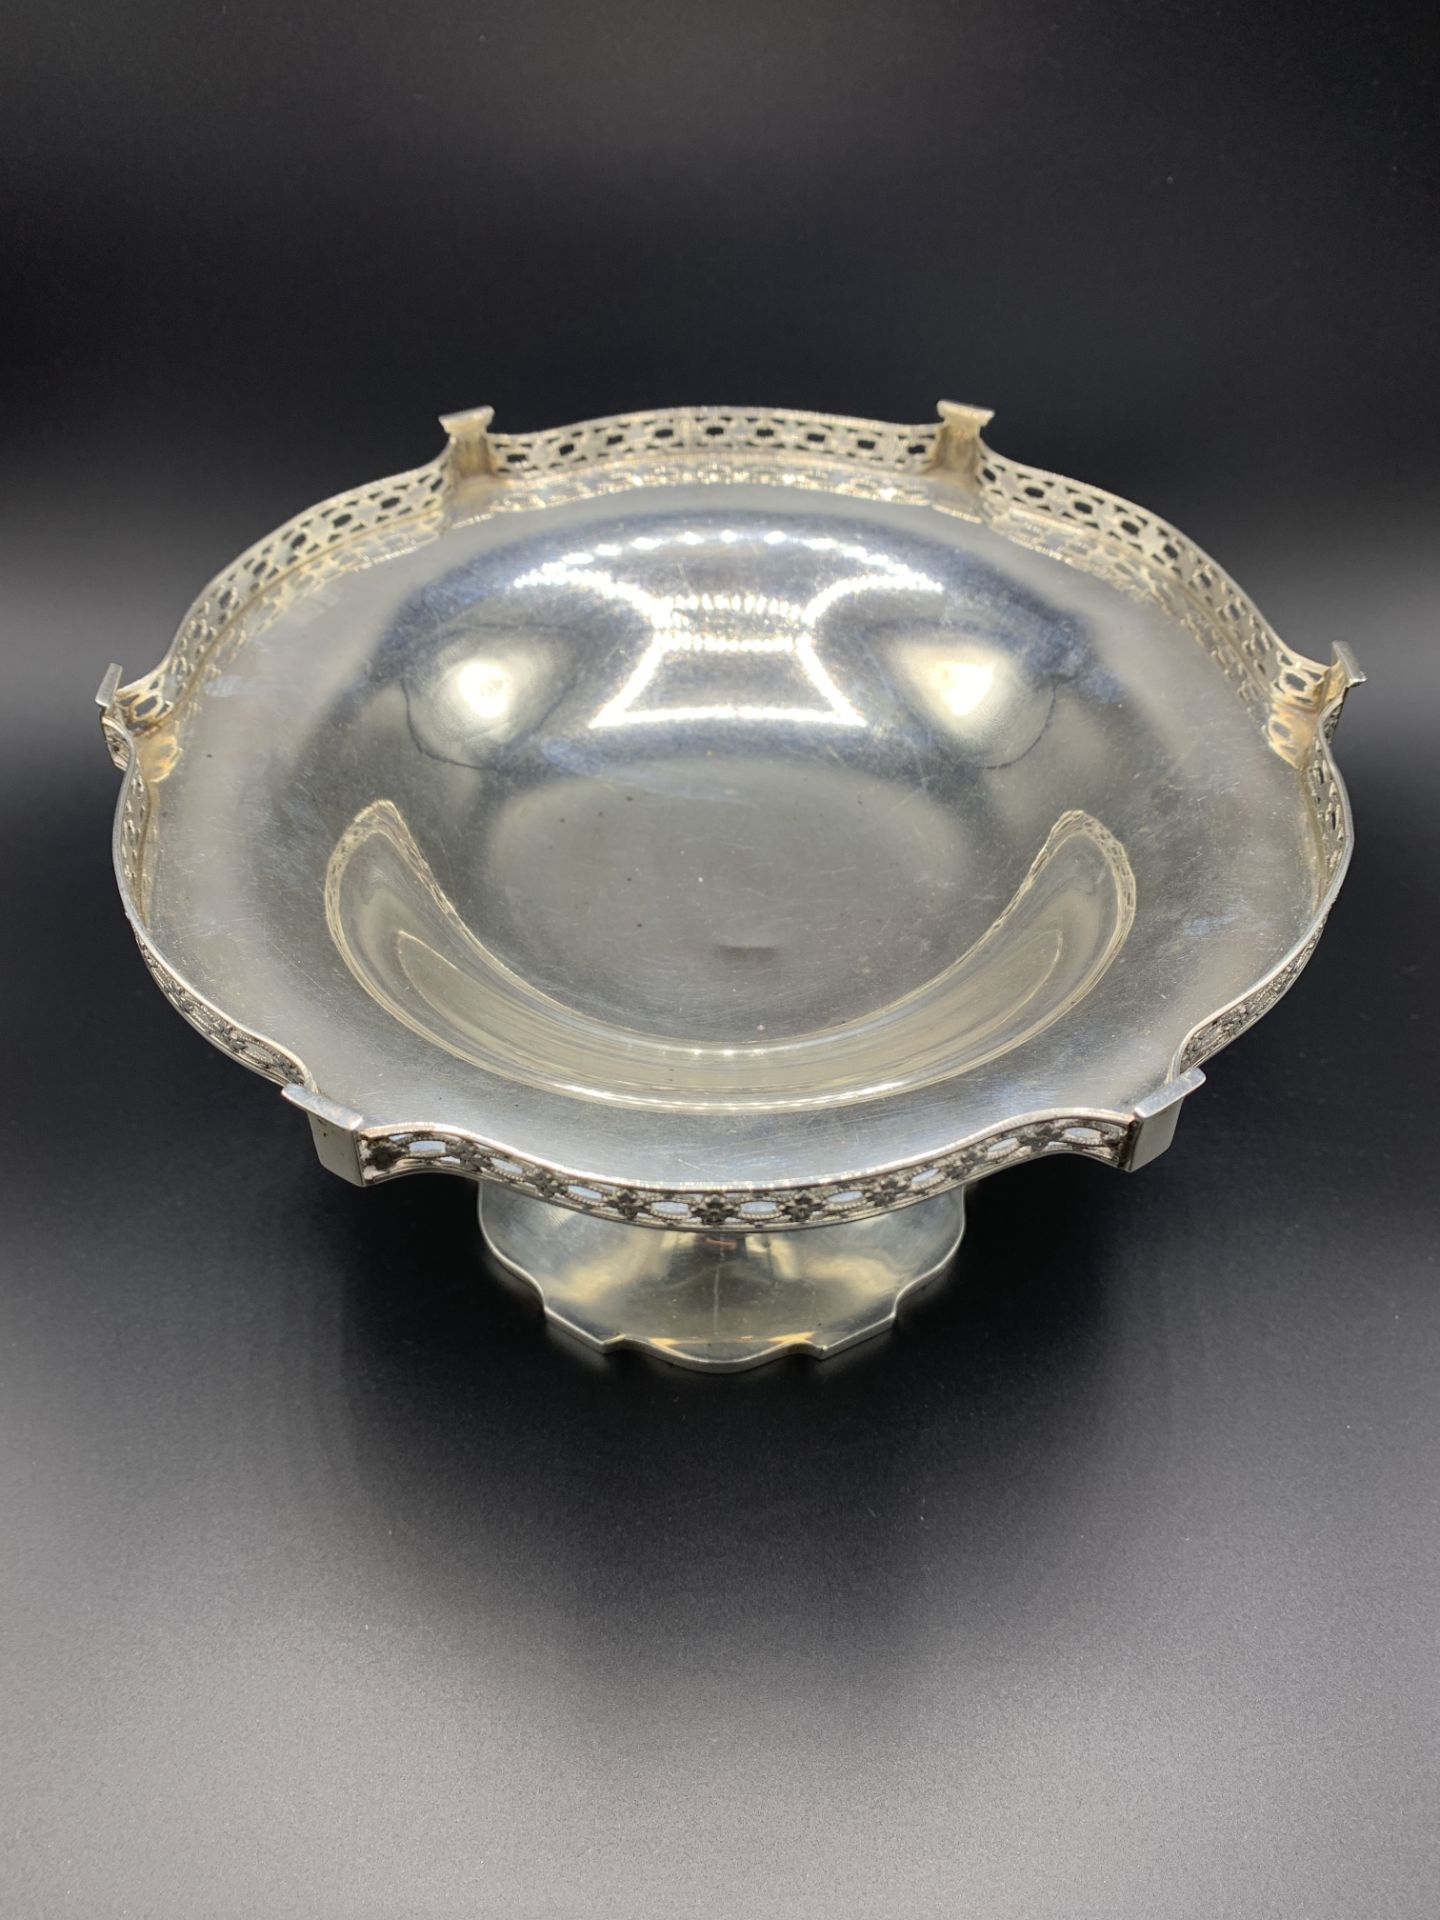 Sterling silver pierced gallery fruit bowl/centerpiece - Image 6 of 6